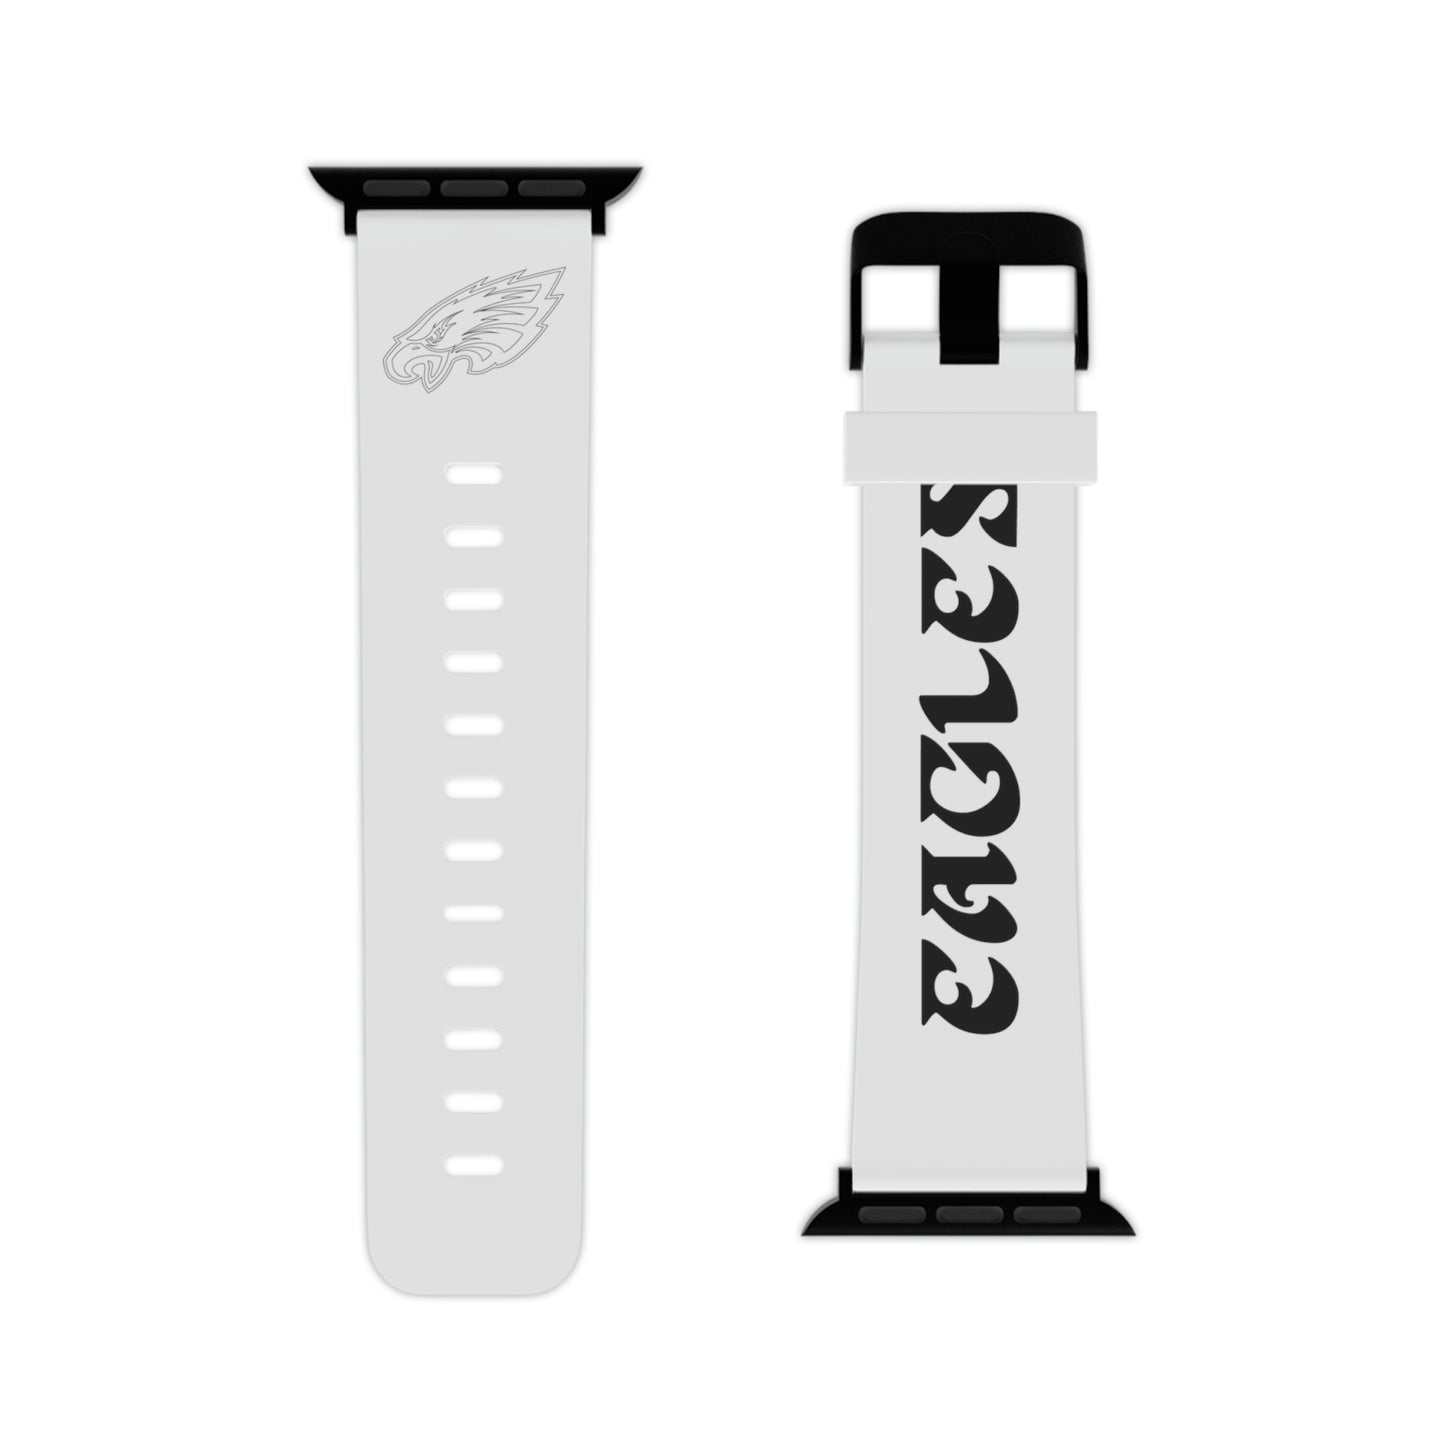 Philadelphia Eagles Watch Band for Apple Watch